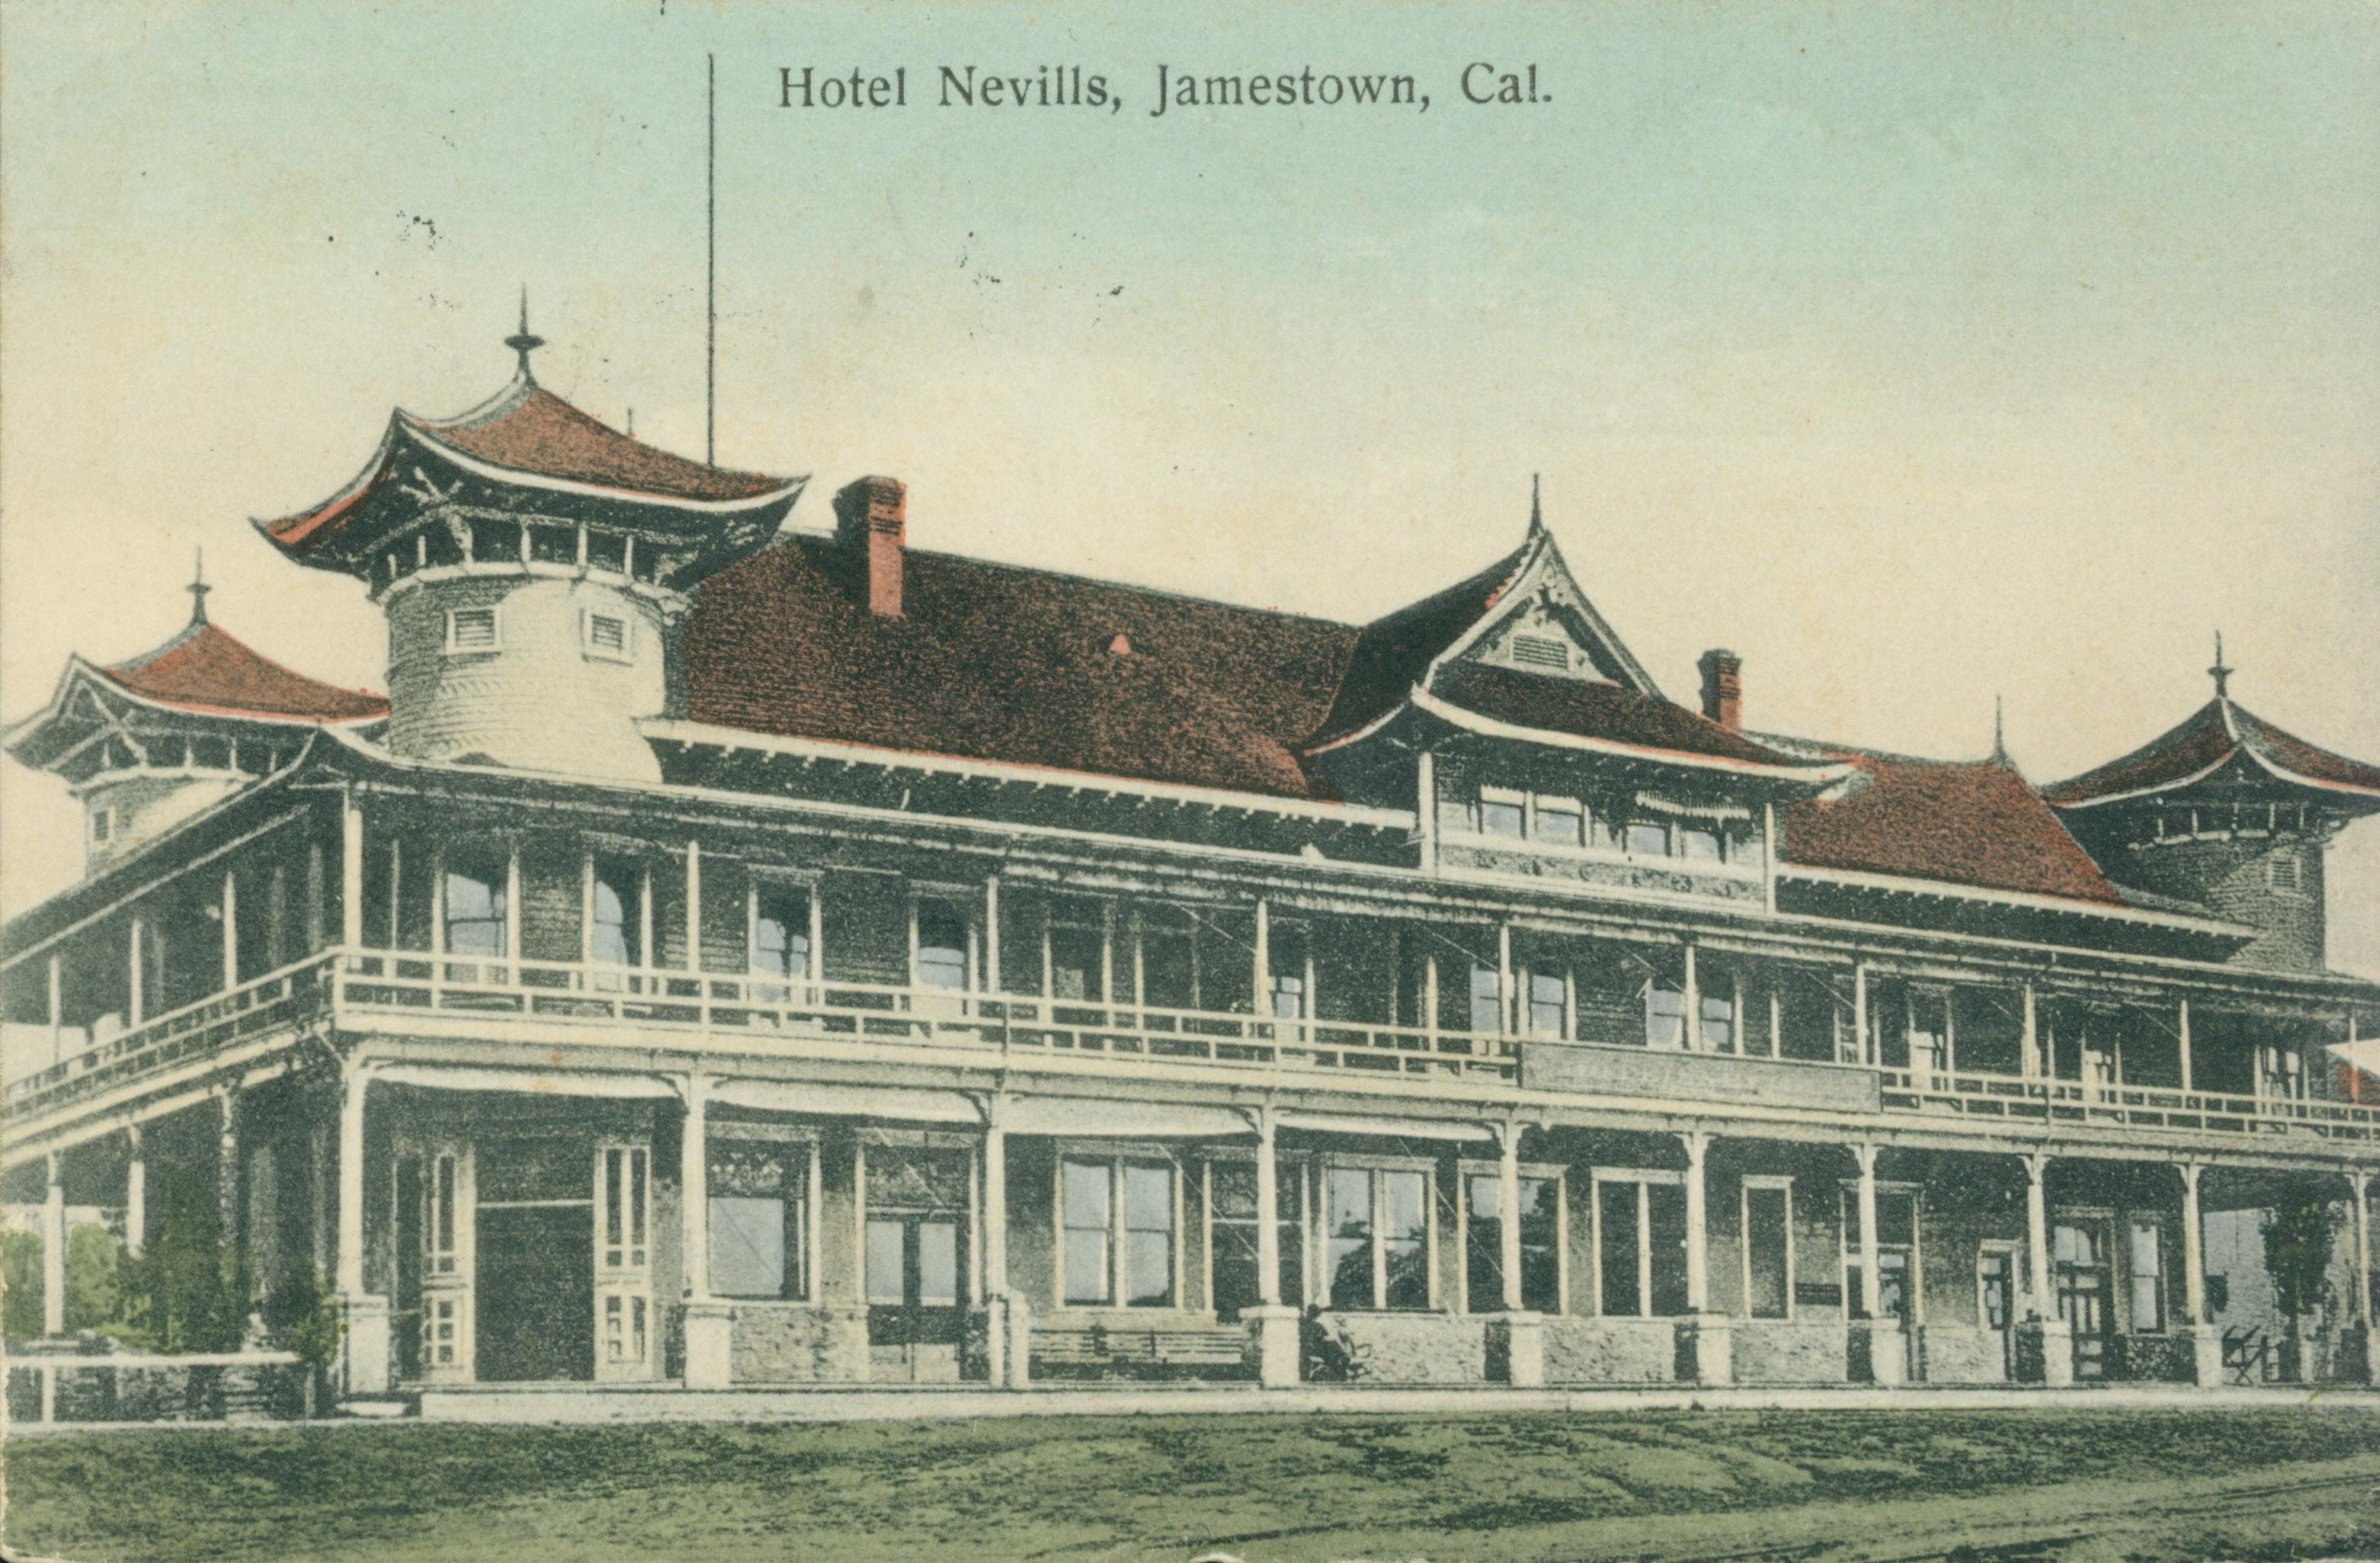 Shows the exterior of Hotel Nevills in Jamestown